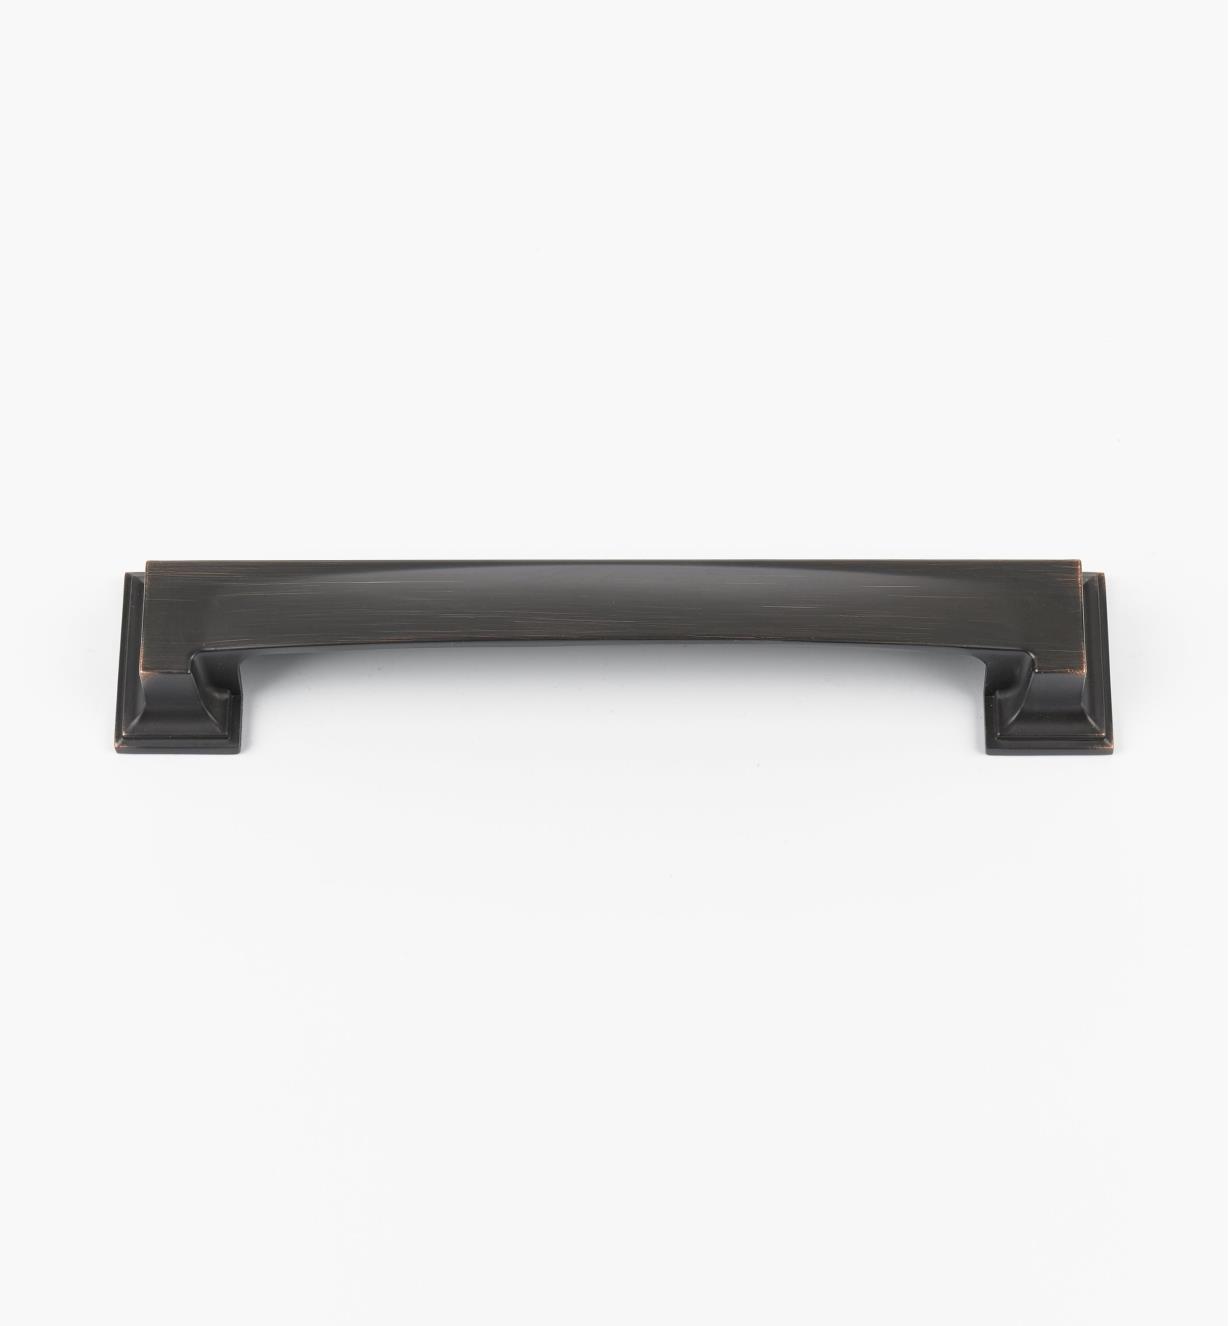 02A2537 - 126mm/160mm Oil-Rubbed Bronze Appoint Cup Pull